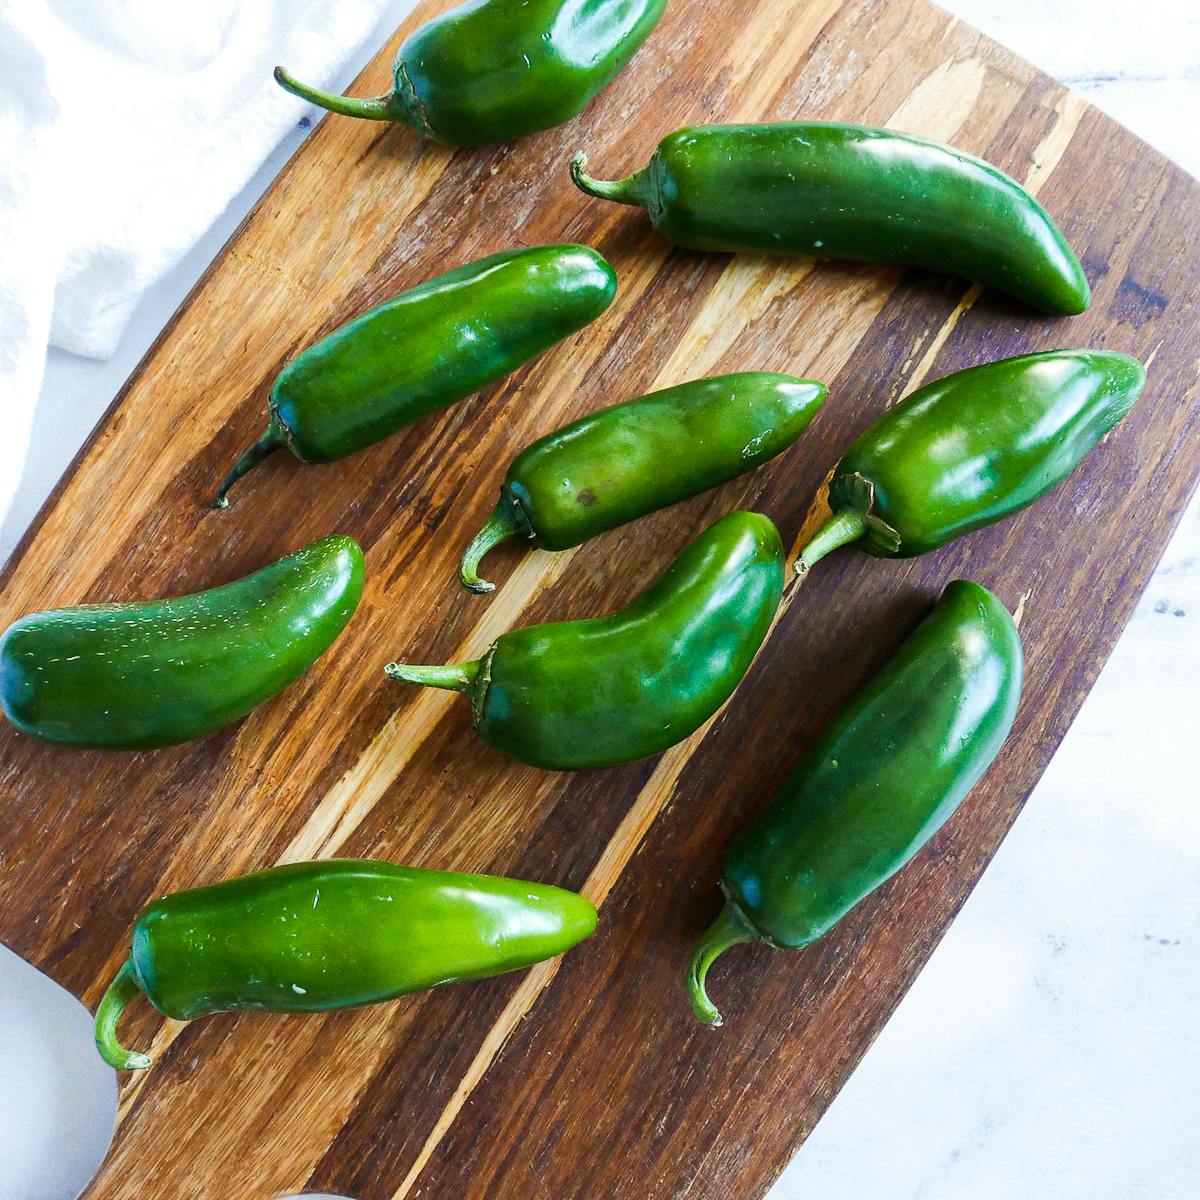 Several jalapeño peppers arranged on a wooden cutting board.